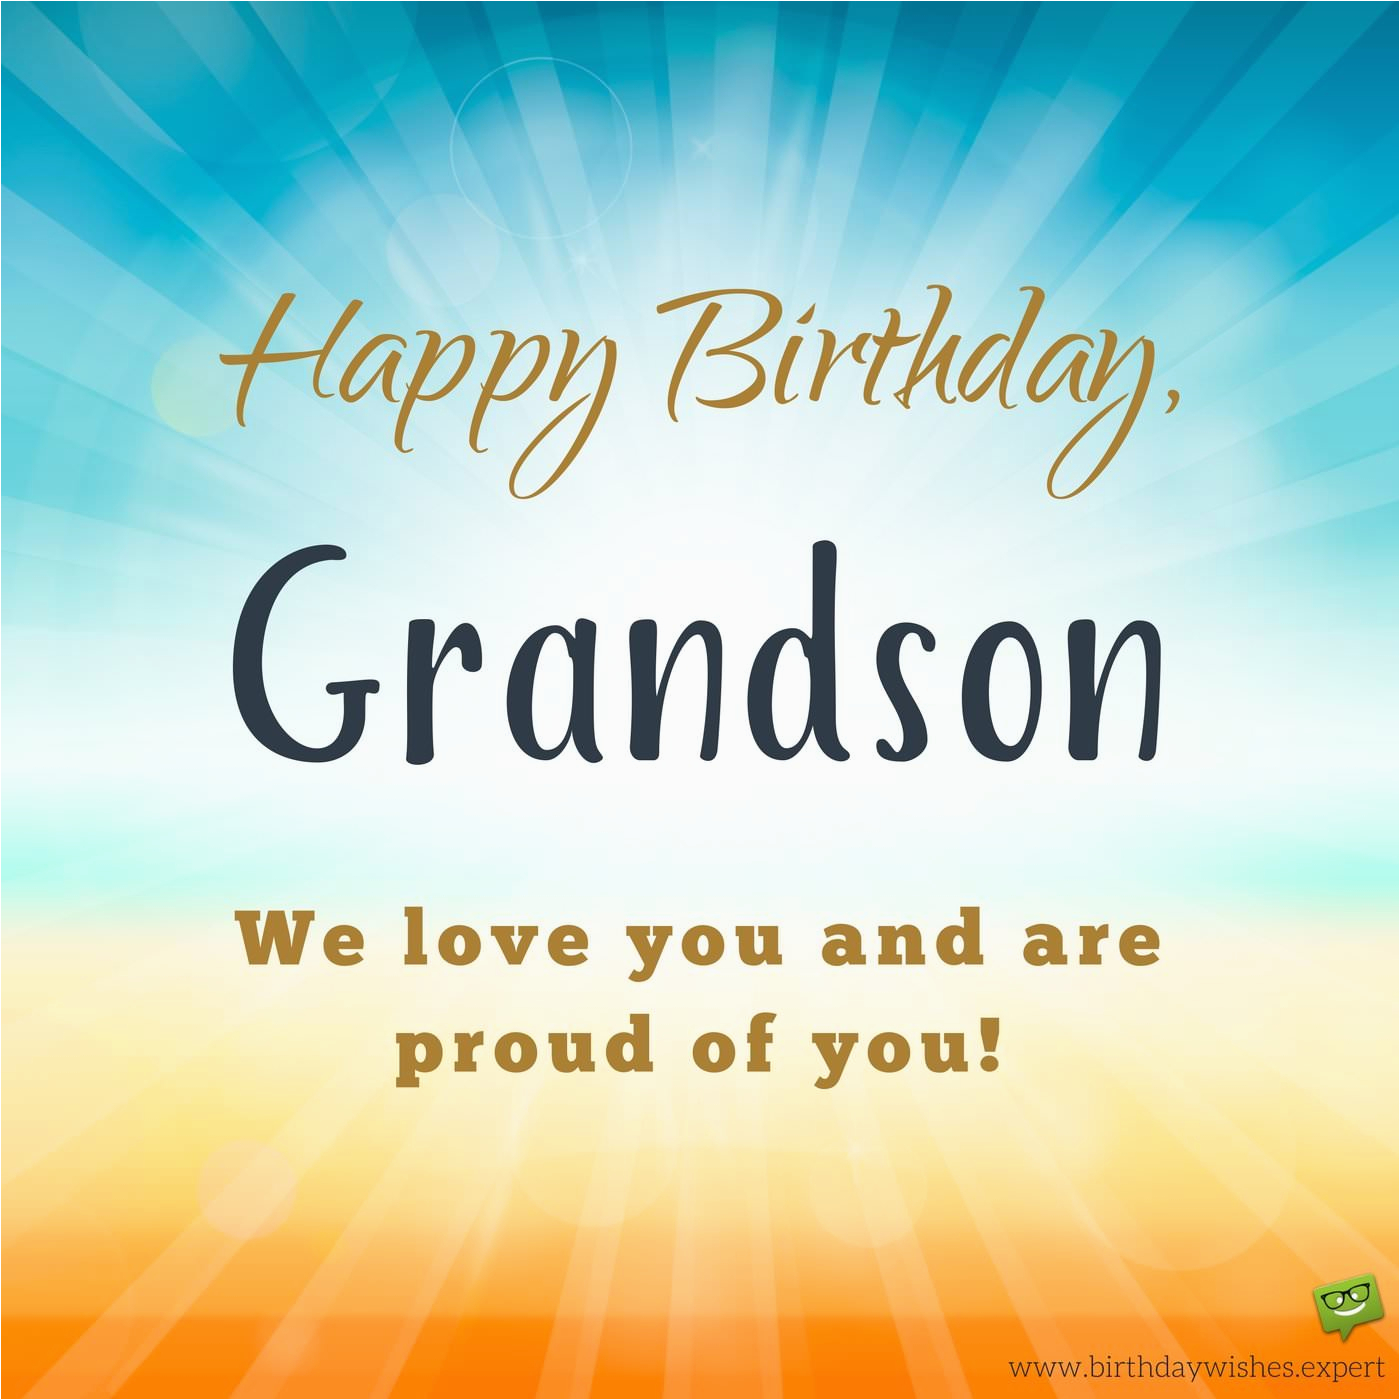 from your hi tech grandma and grandpa birthday wishes for my grandson